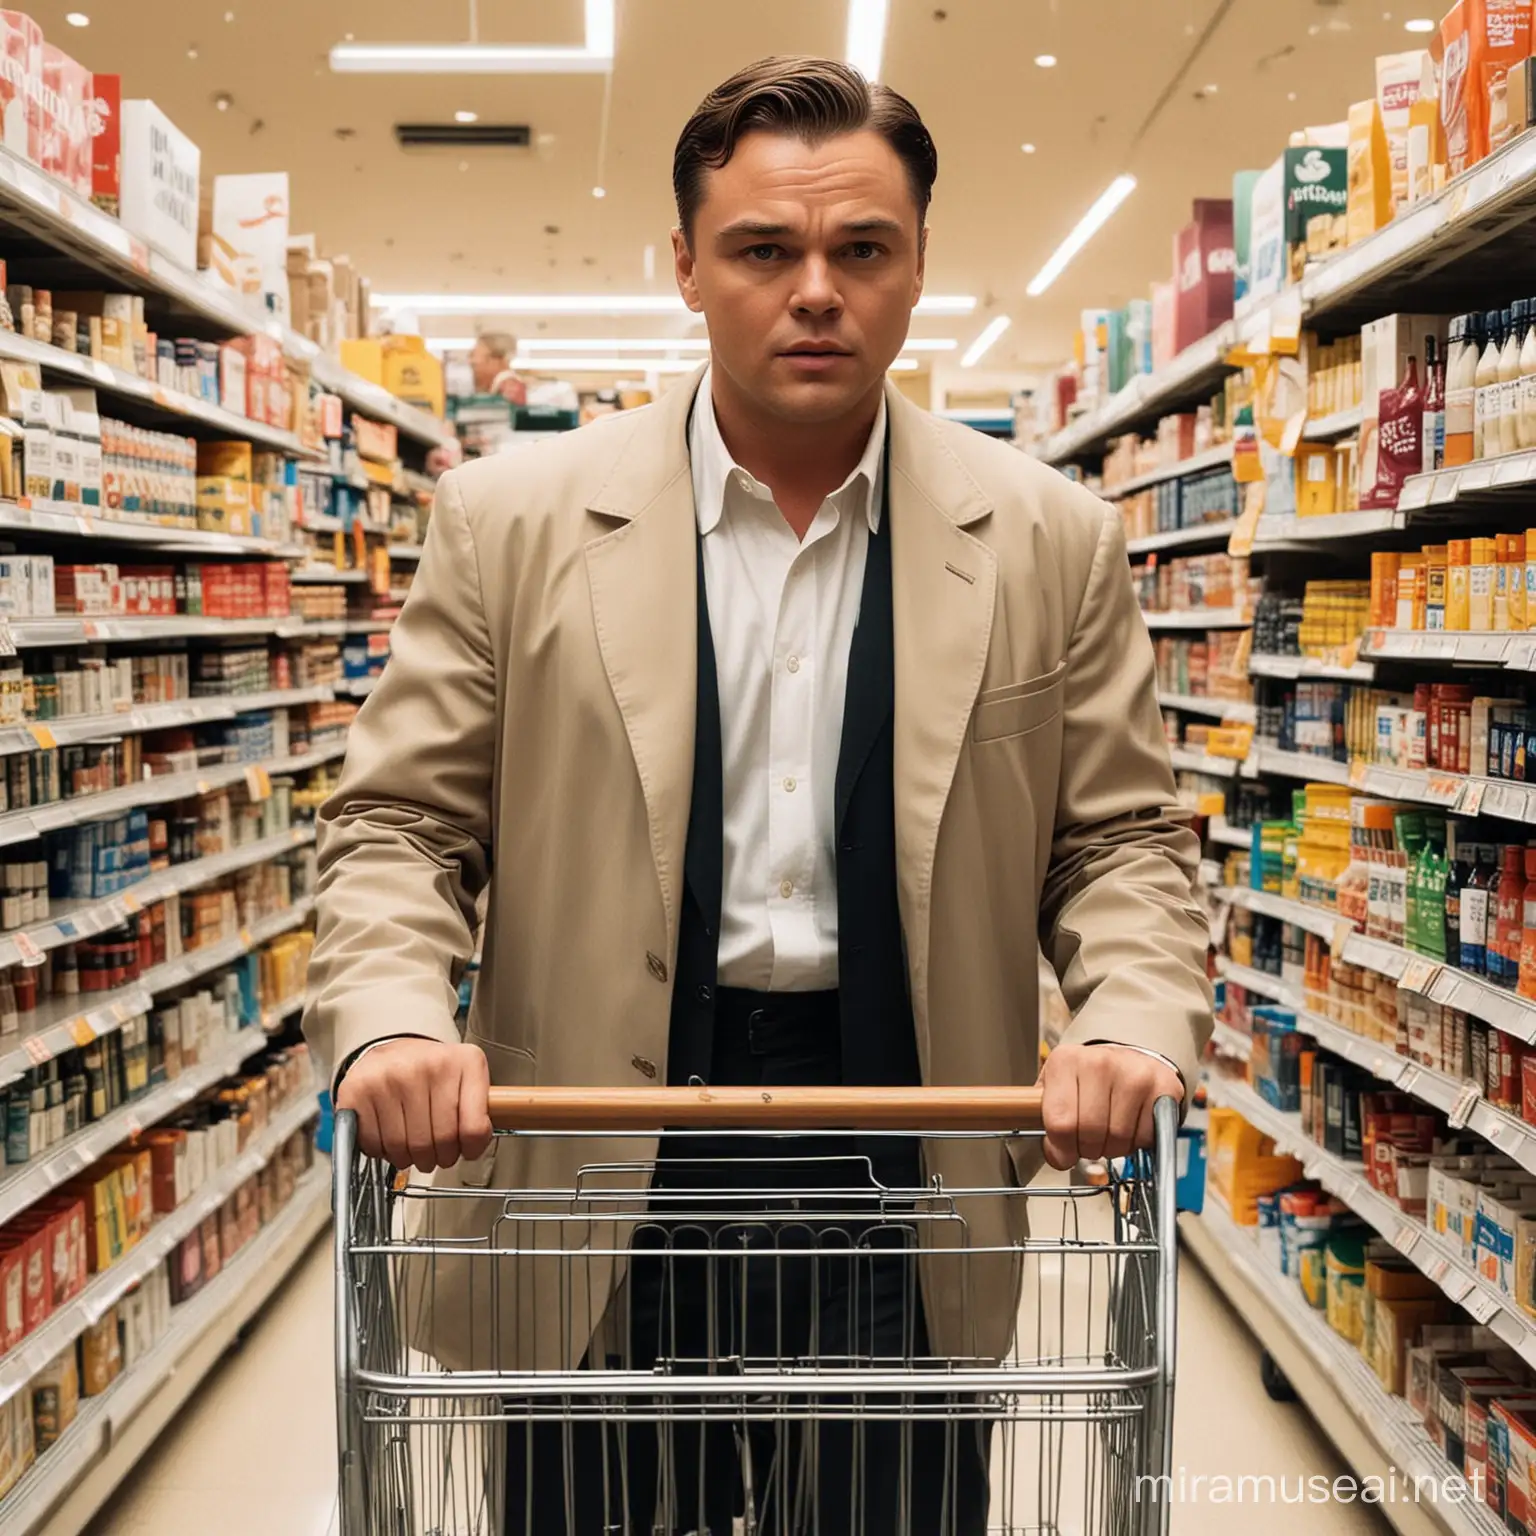 "catch me if you can" movie character leonardo di caprio in grocery store with a smart phone in one hand and shopping trolley in front of him; instagram; no text ​